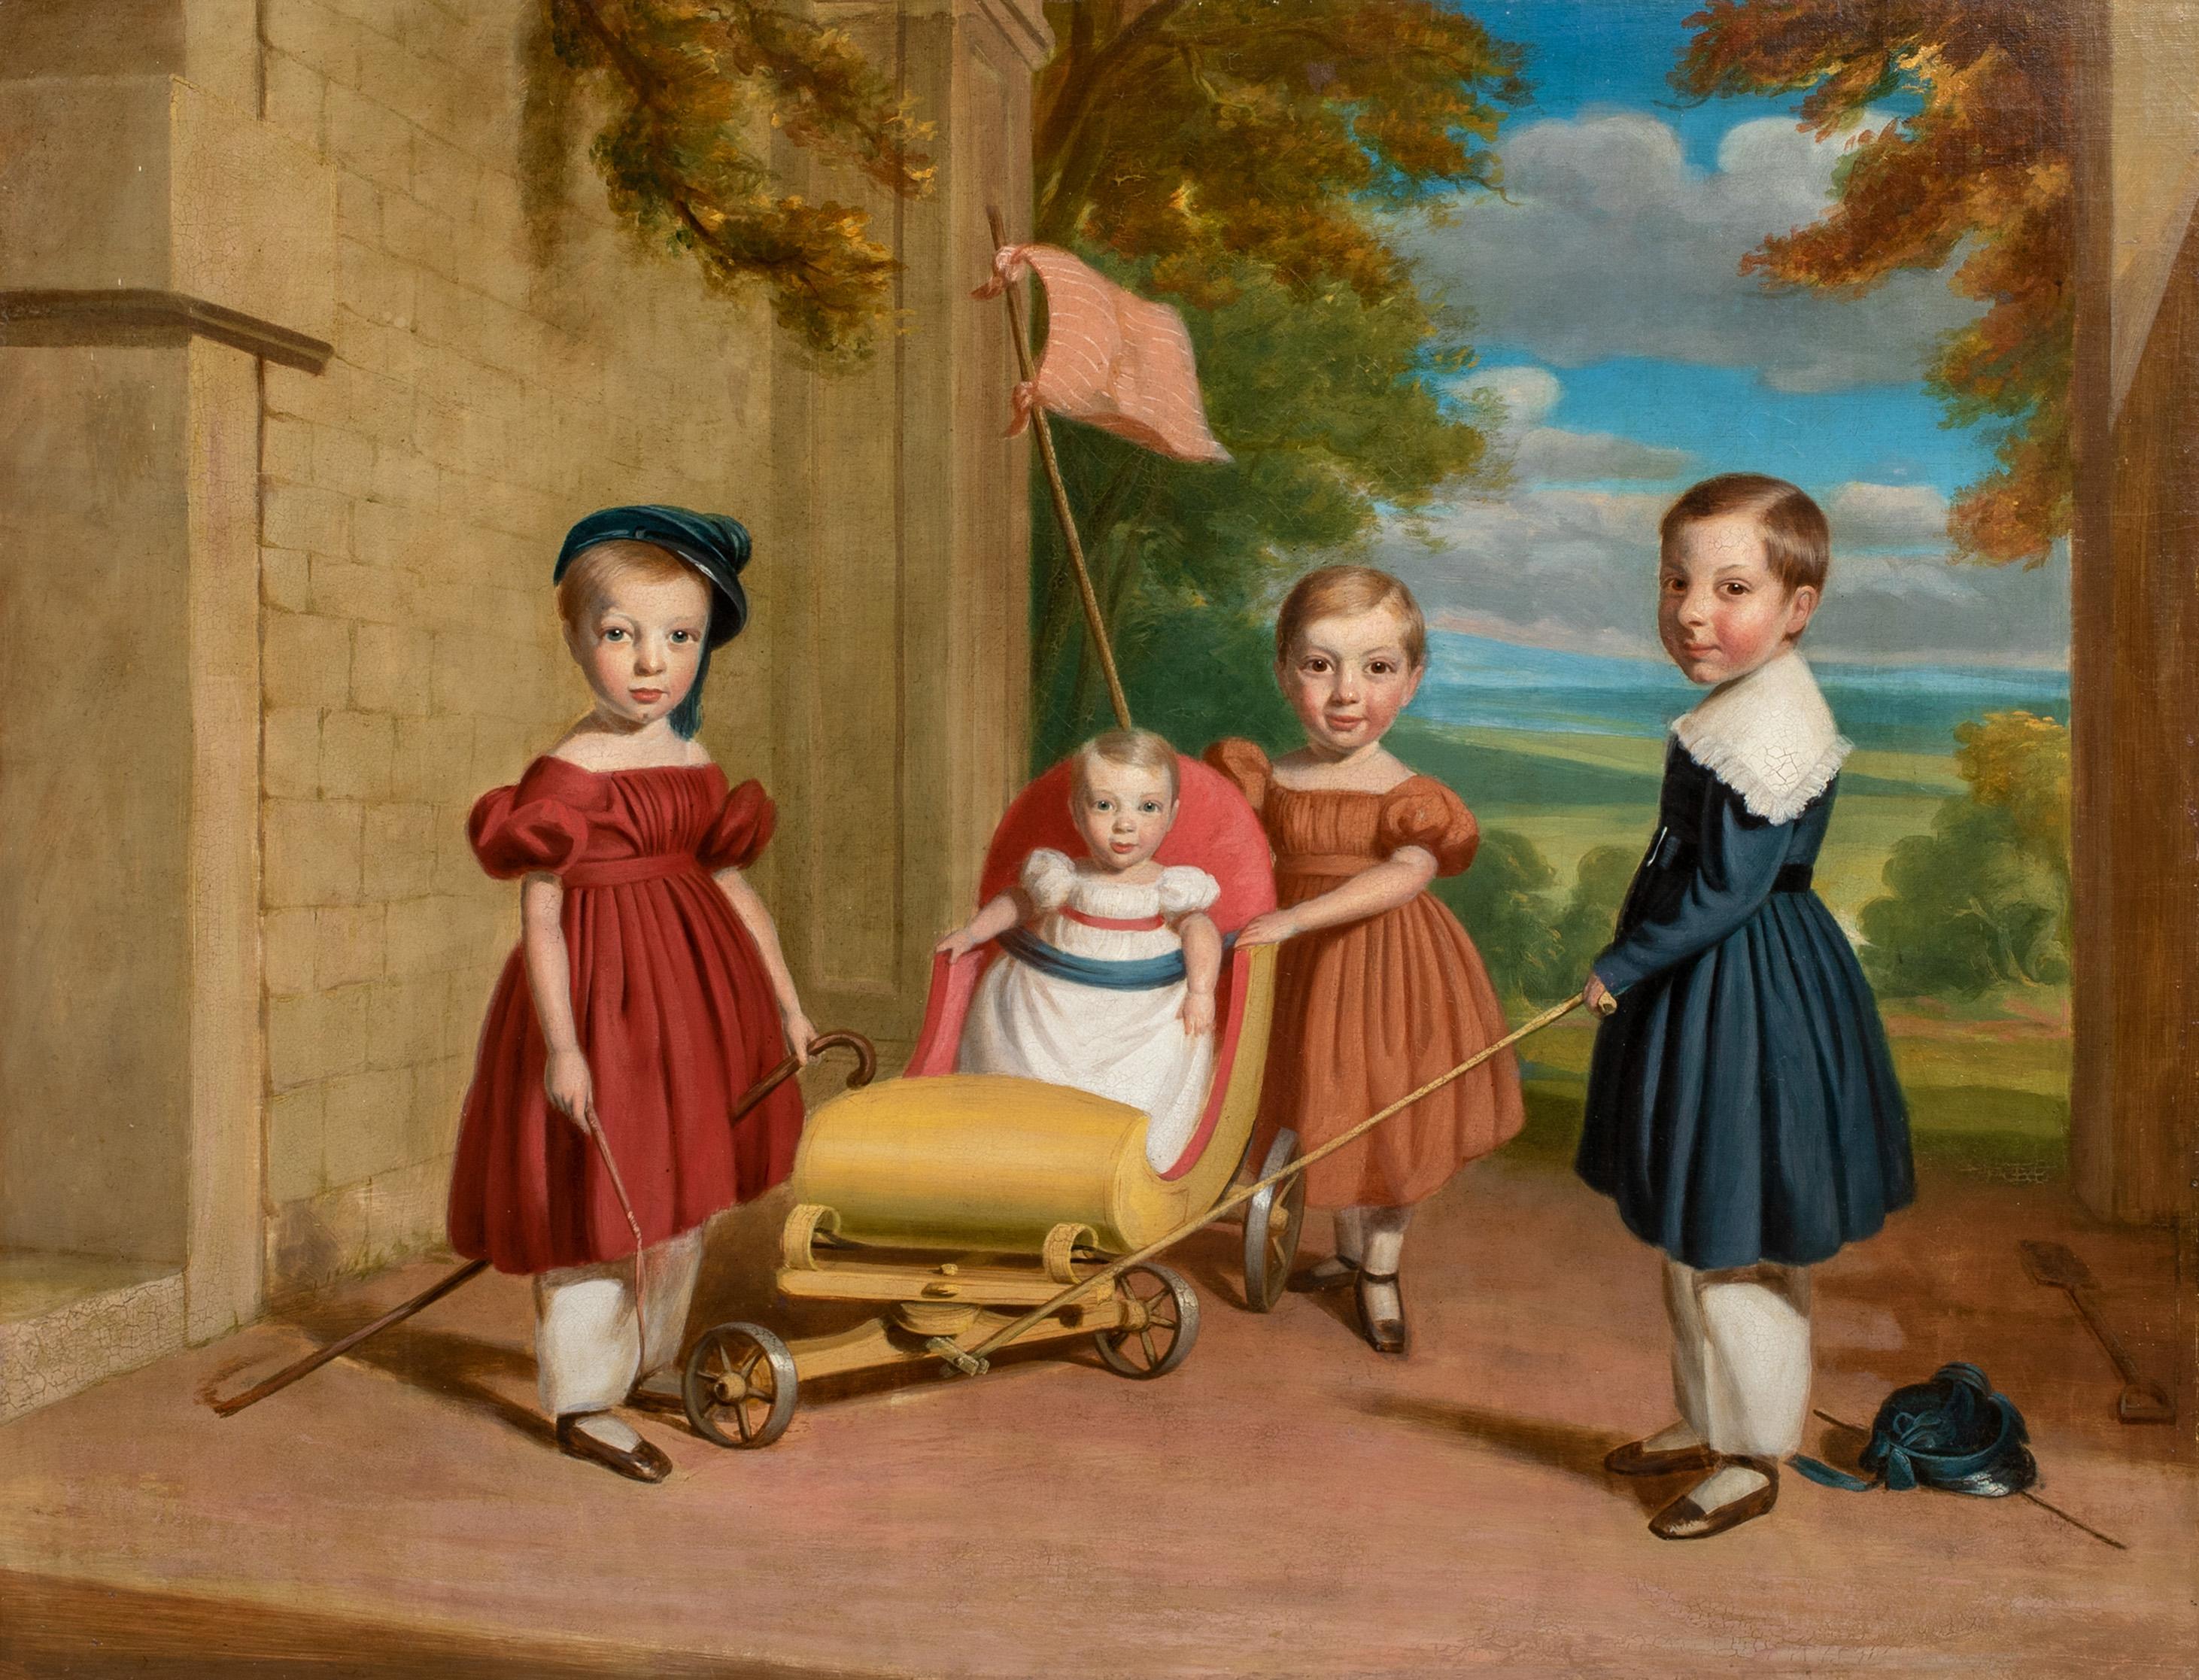 Portrait Of Children Playing, 19th Century American School - Brown Figurative Painting by Unknown